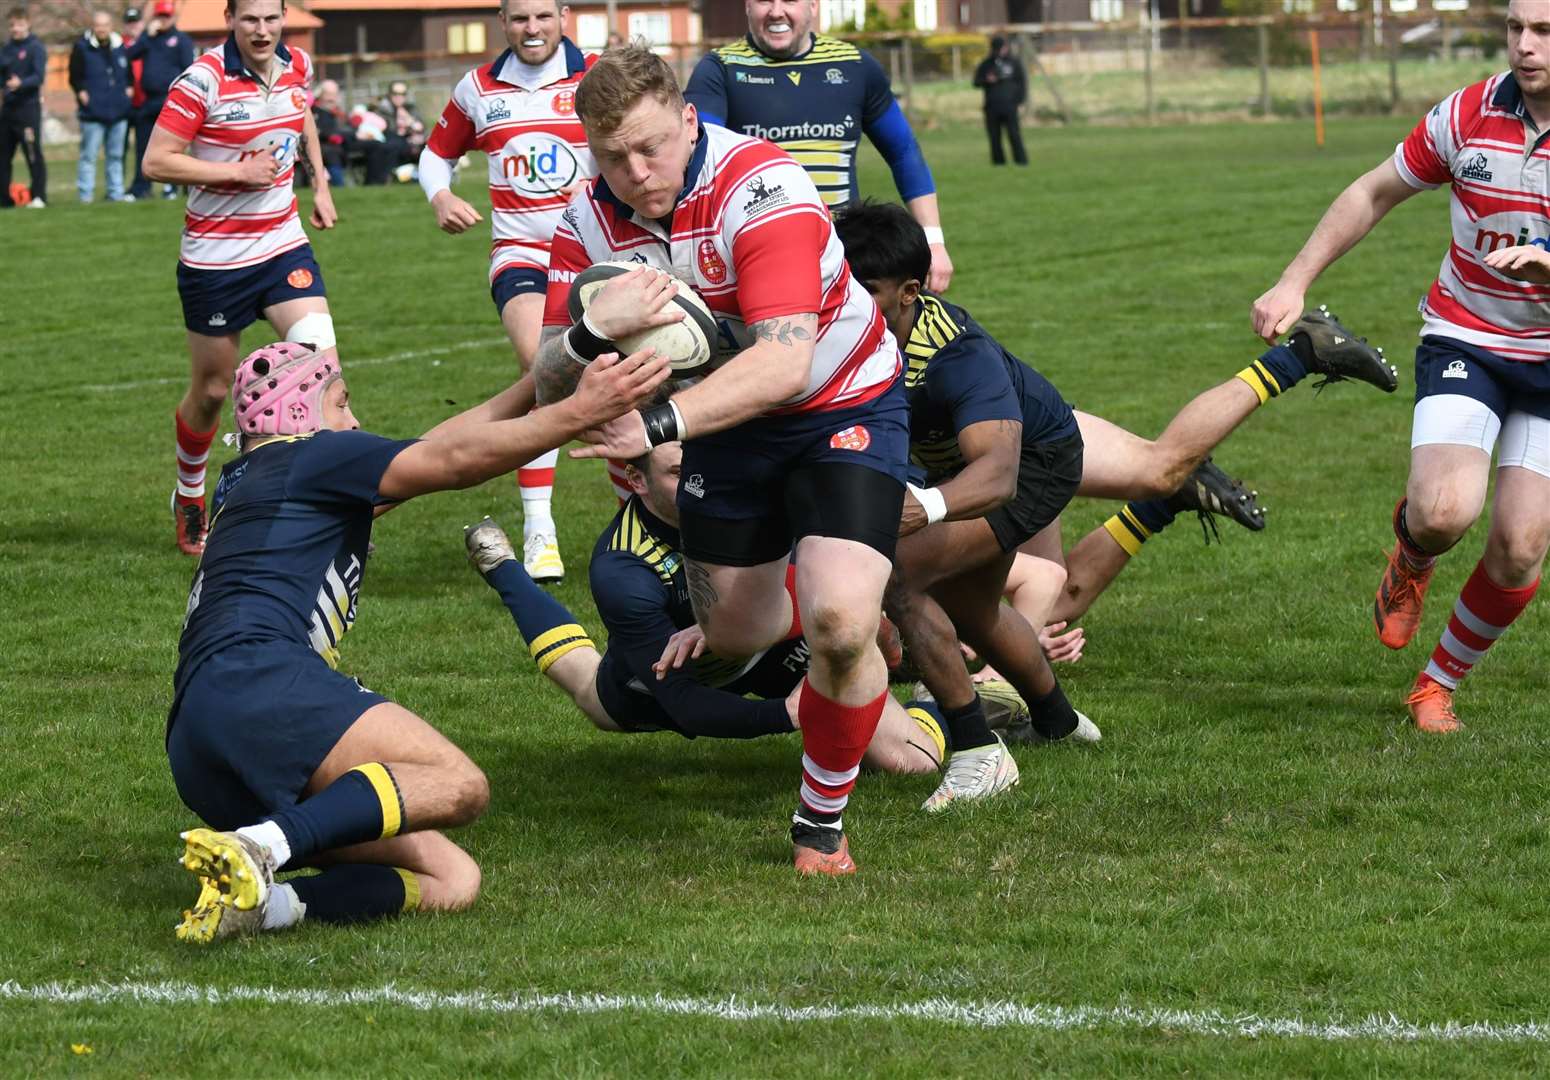 Lewis Scott breaks tackle to score his first try. Picture: James Officer